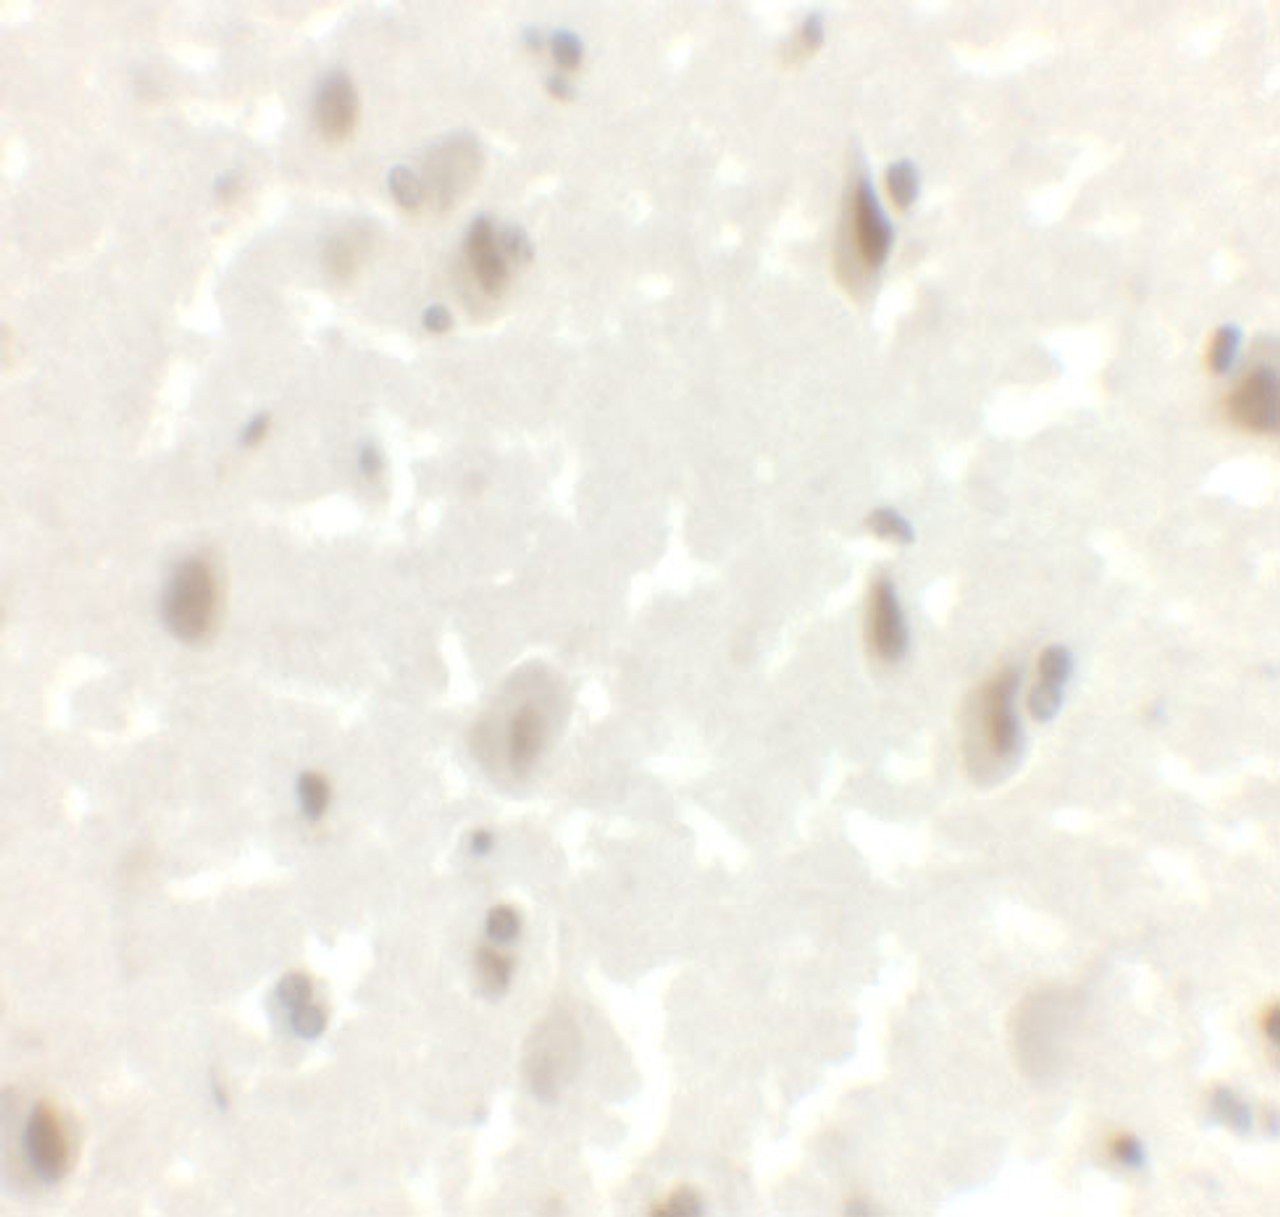 Immunohistochemistry of LMX1A in human brain tissue with LMX1A antibody at 2.5 ug/mL.